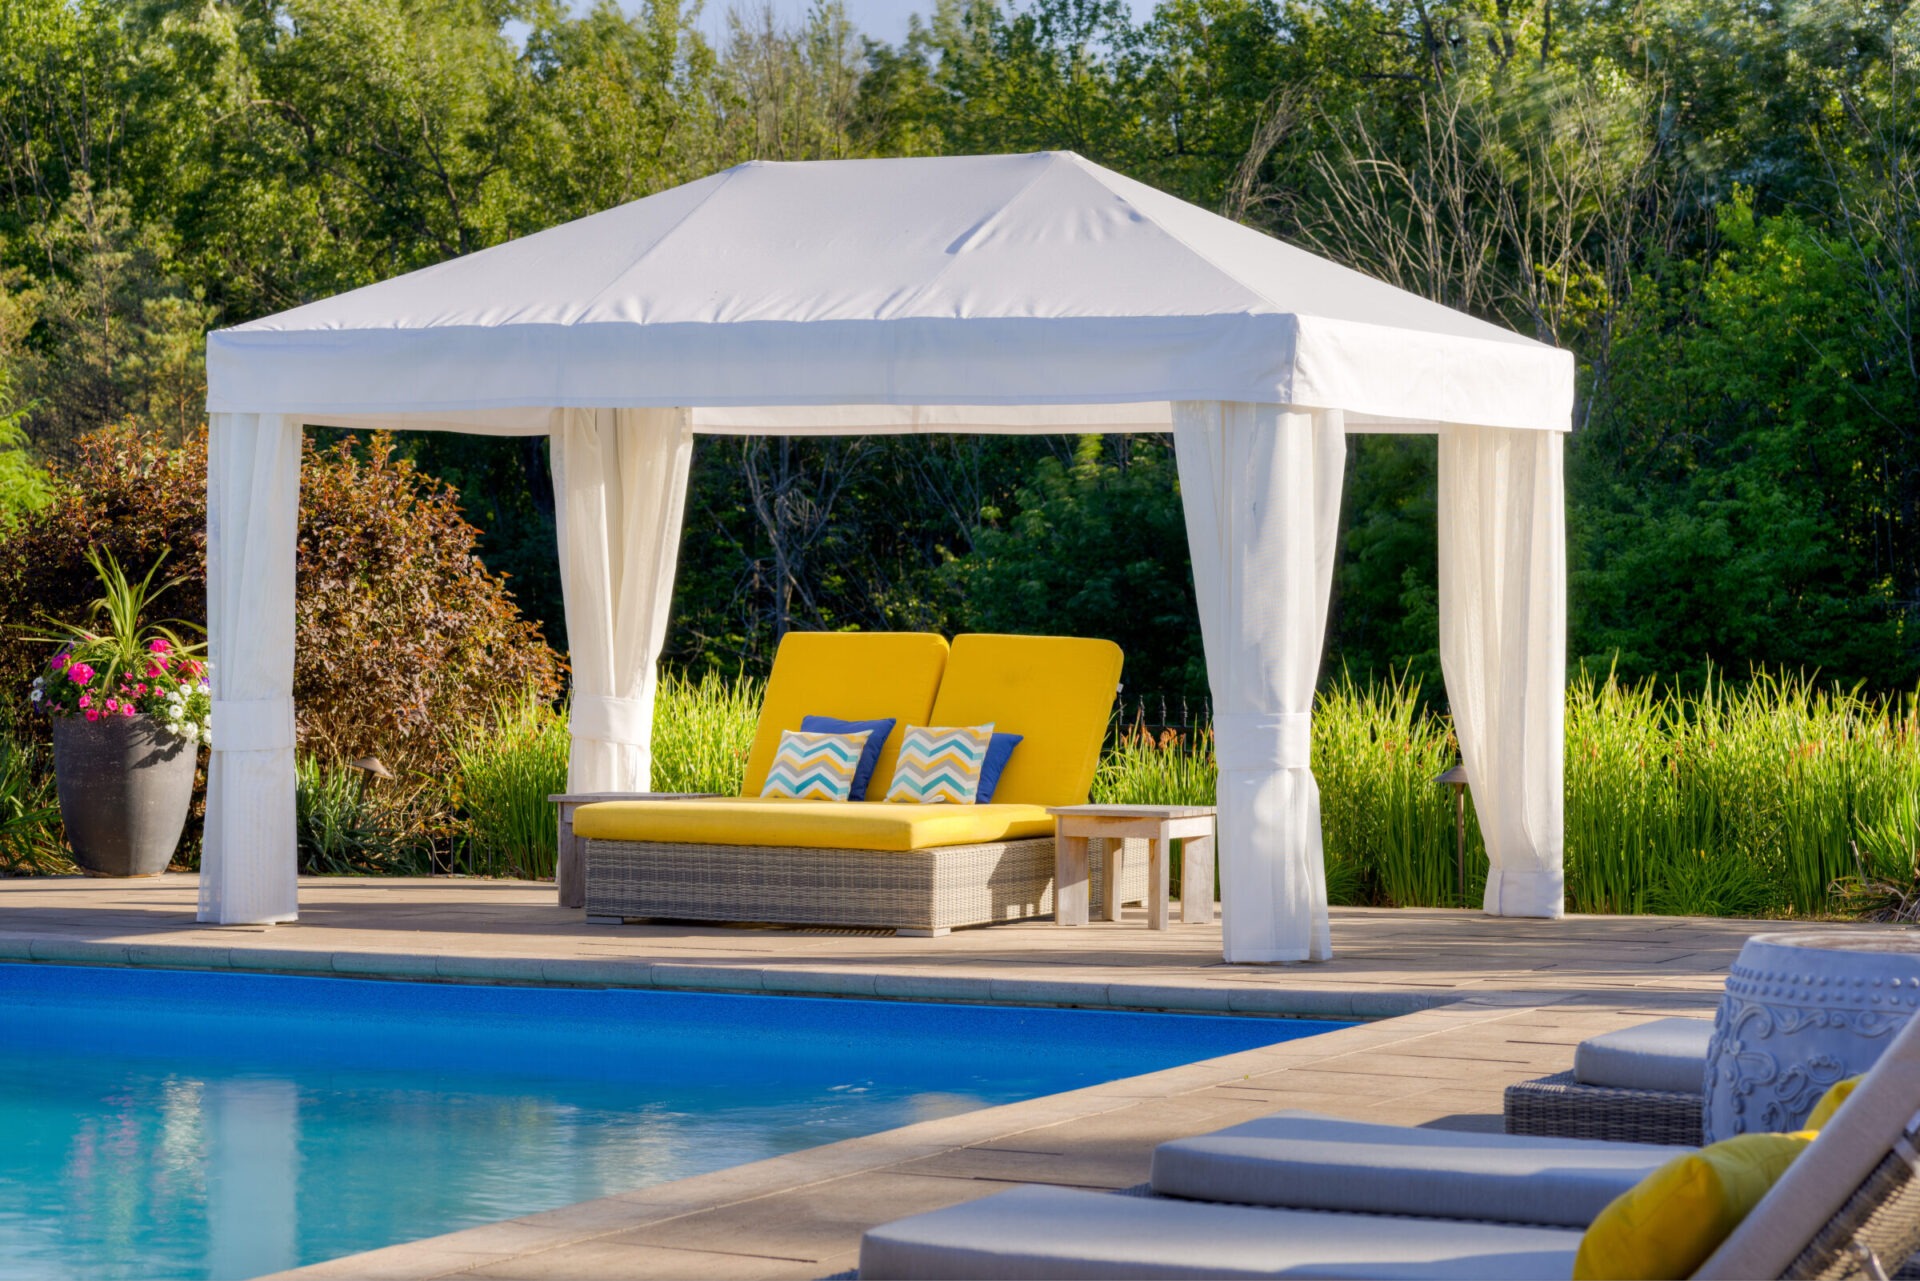 A luxurious poolside features a white gazebo with flowing curtains, a bright yellow lounger with decorative pillows, surrounded by lush greenery and vibrant plants.